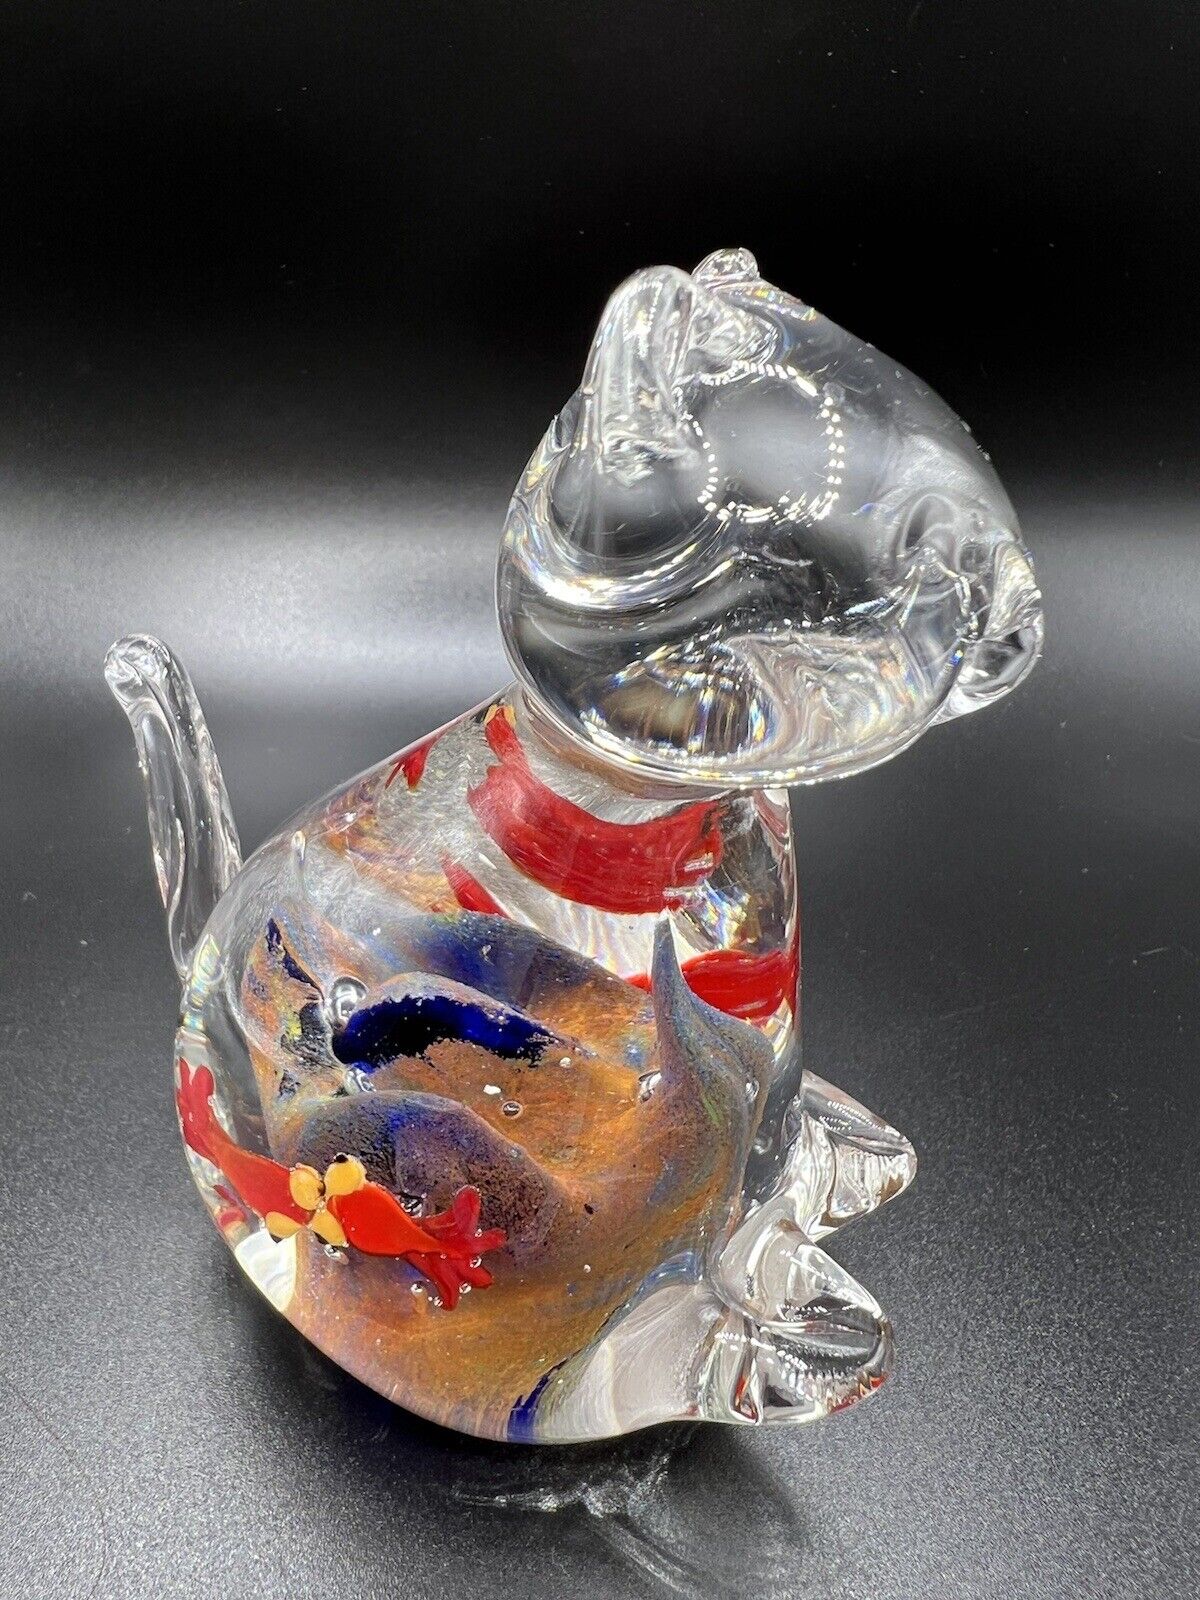 Art Glass Kitty Cat Paperweight Figurine Fish in Tummy 3.5” Tall Polished Base